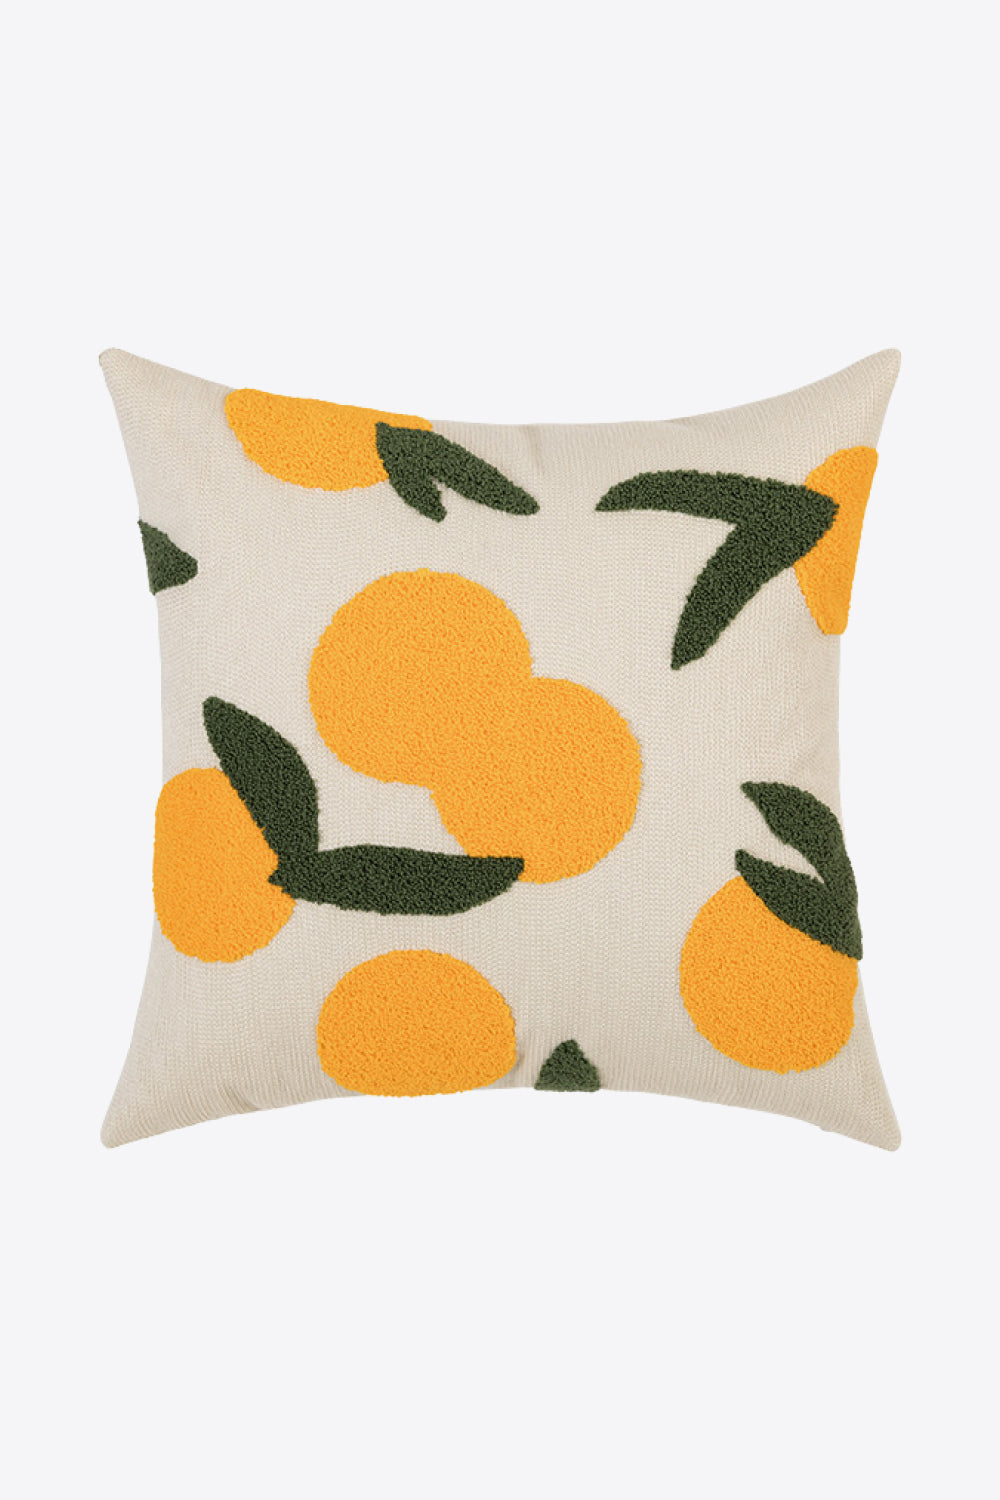 Punch-Needle Decorative Throw Pillow Covers